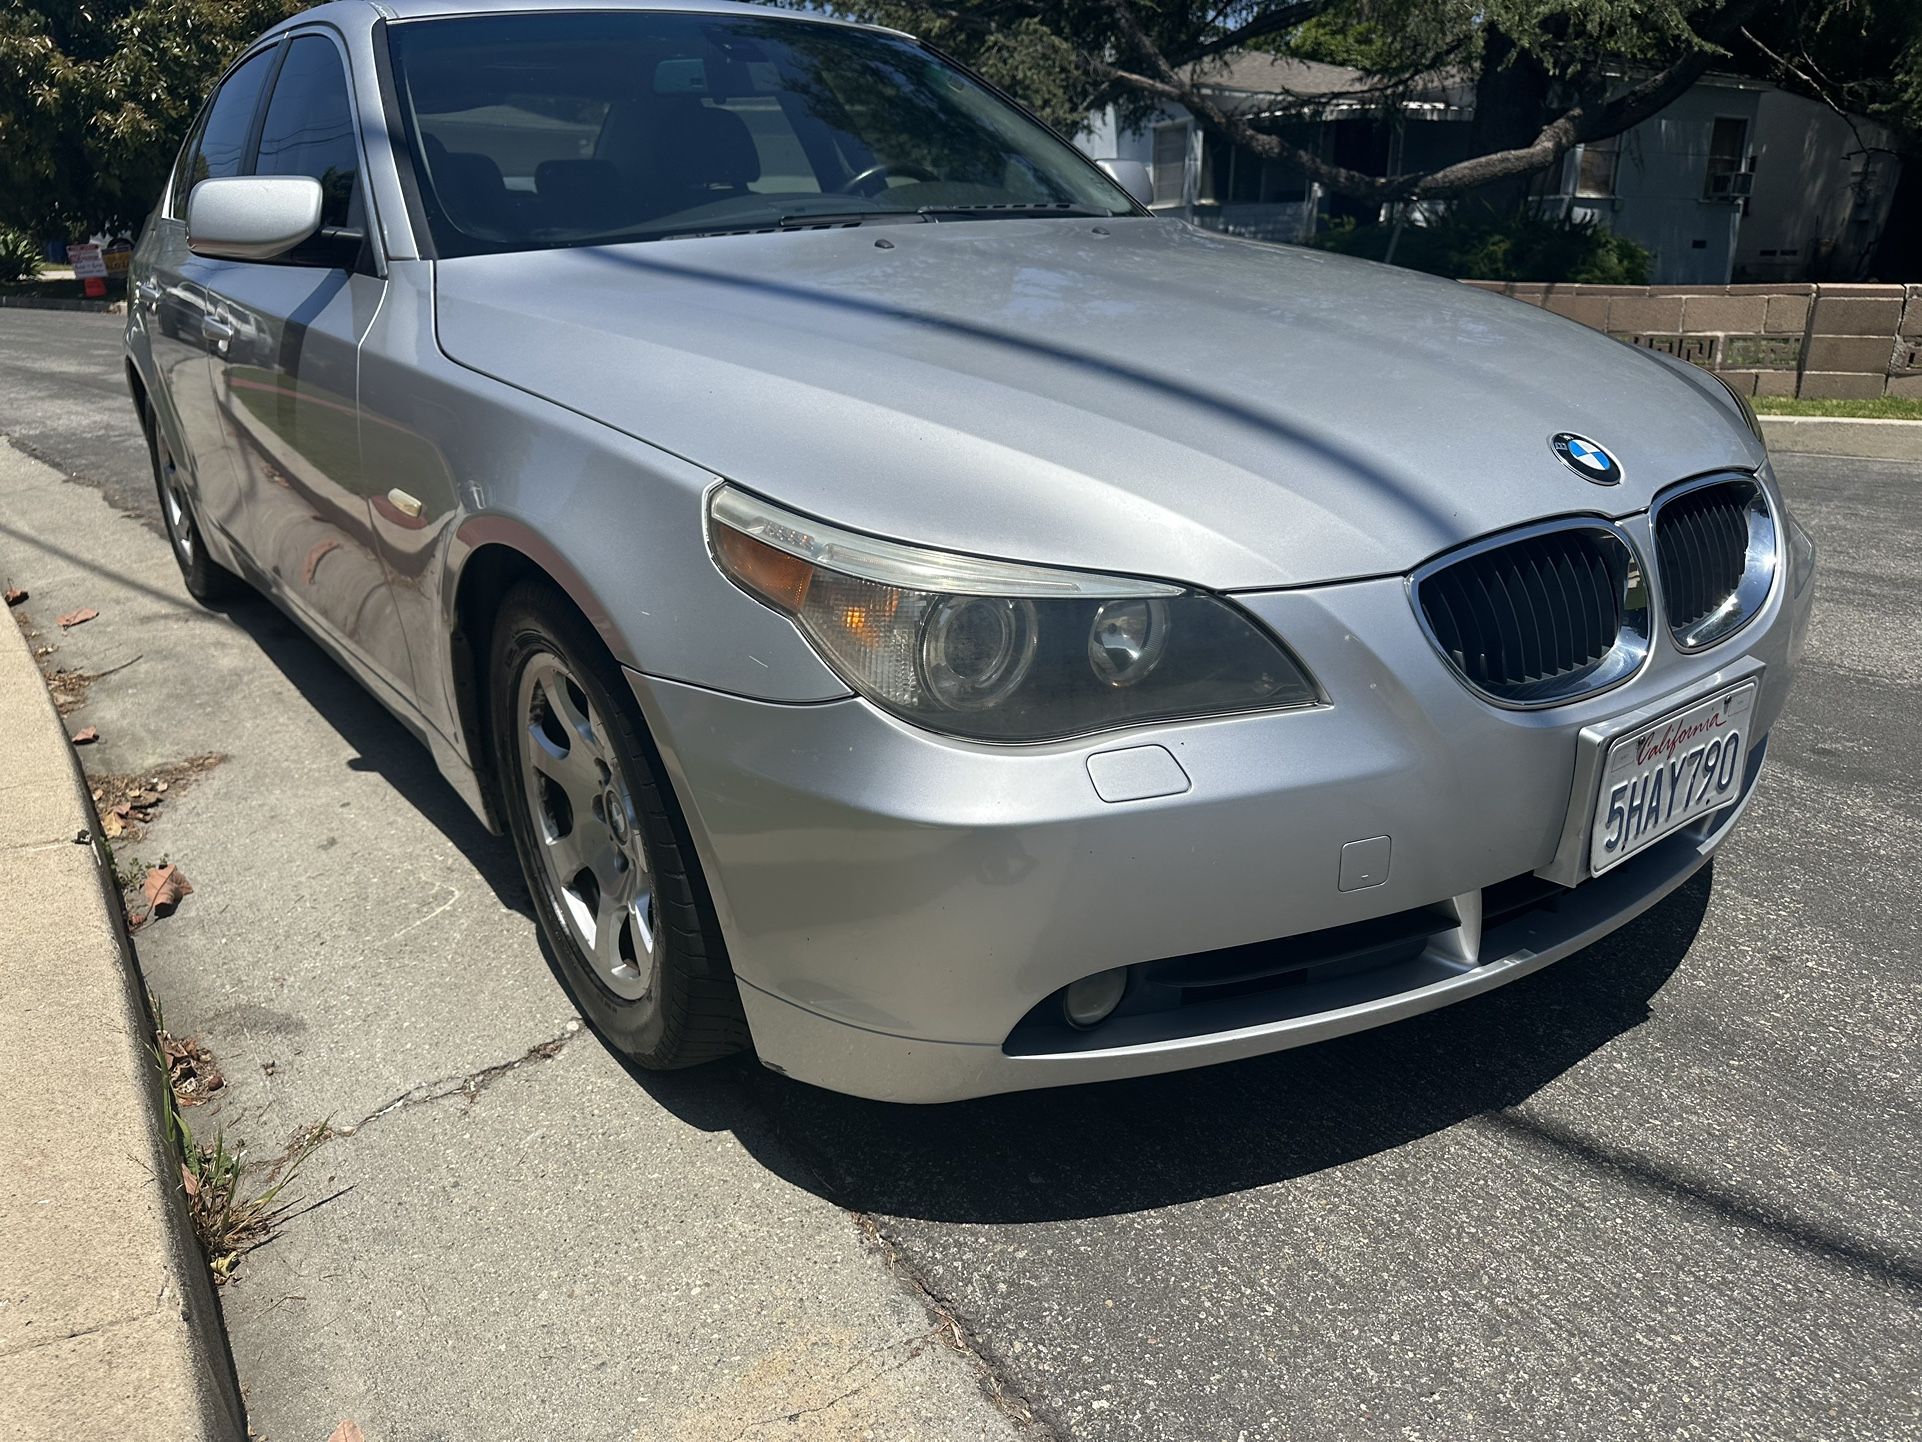 2004 BMW 525i ONE OWNER 171 k Like new in and out Clean title Registered New rites Registered Just a perfect reliable car looks new in and out Donated